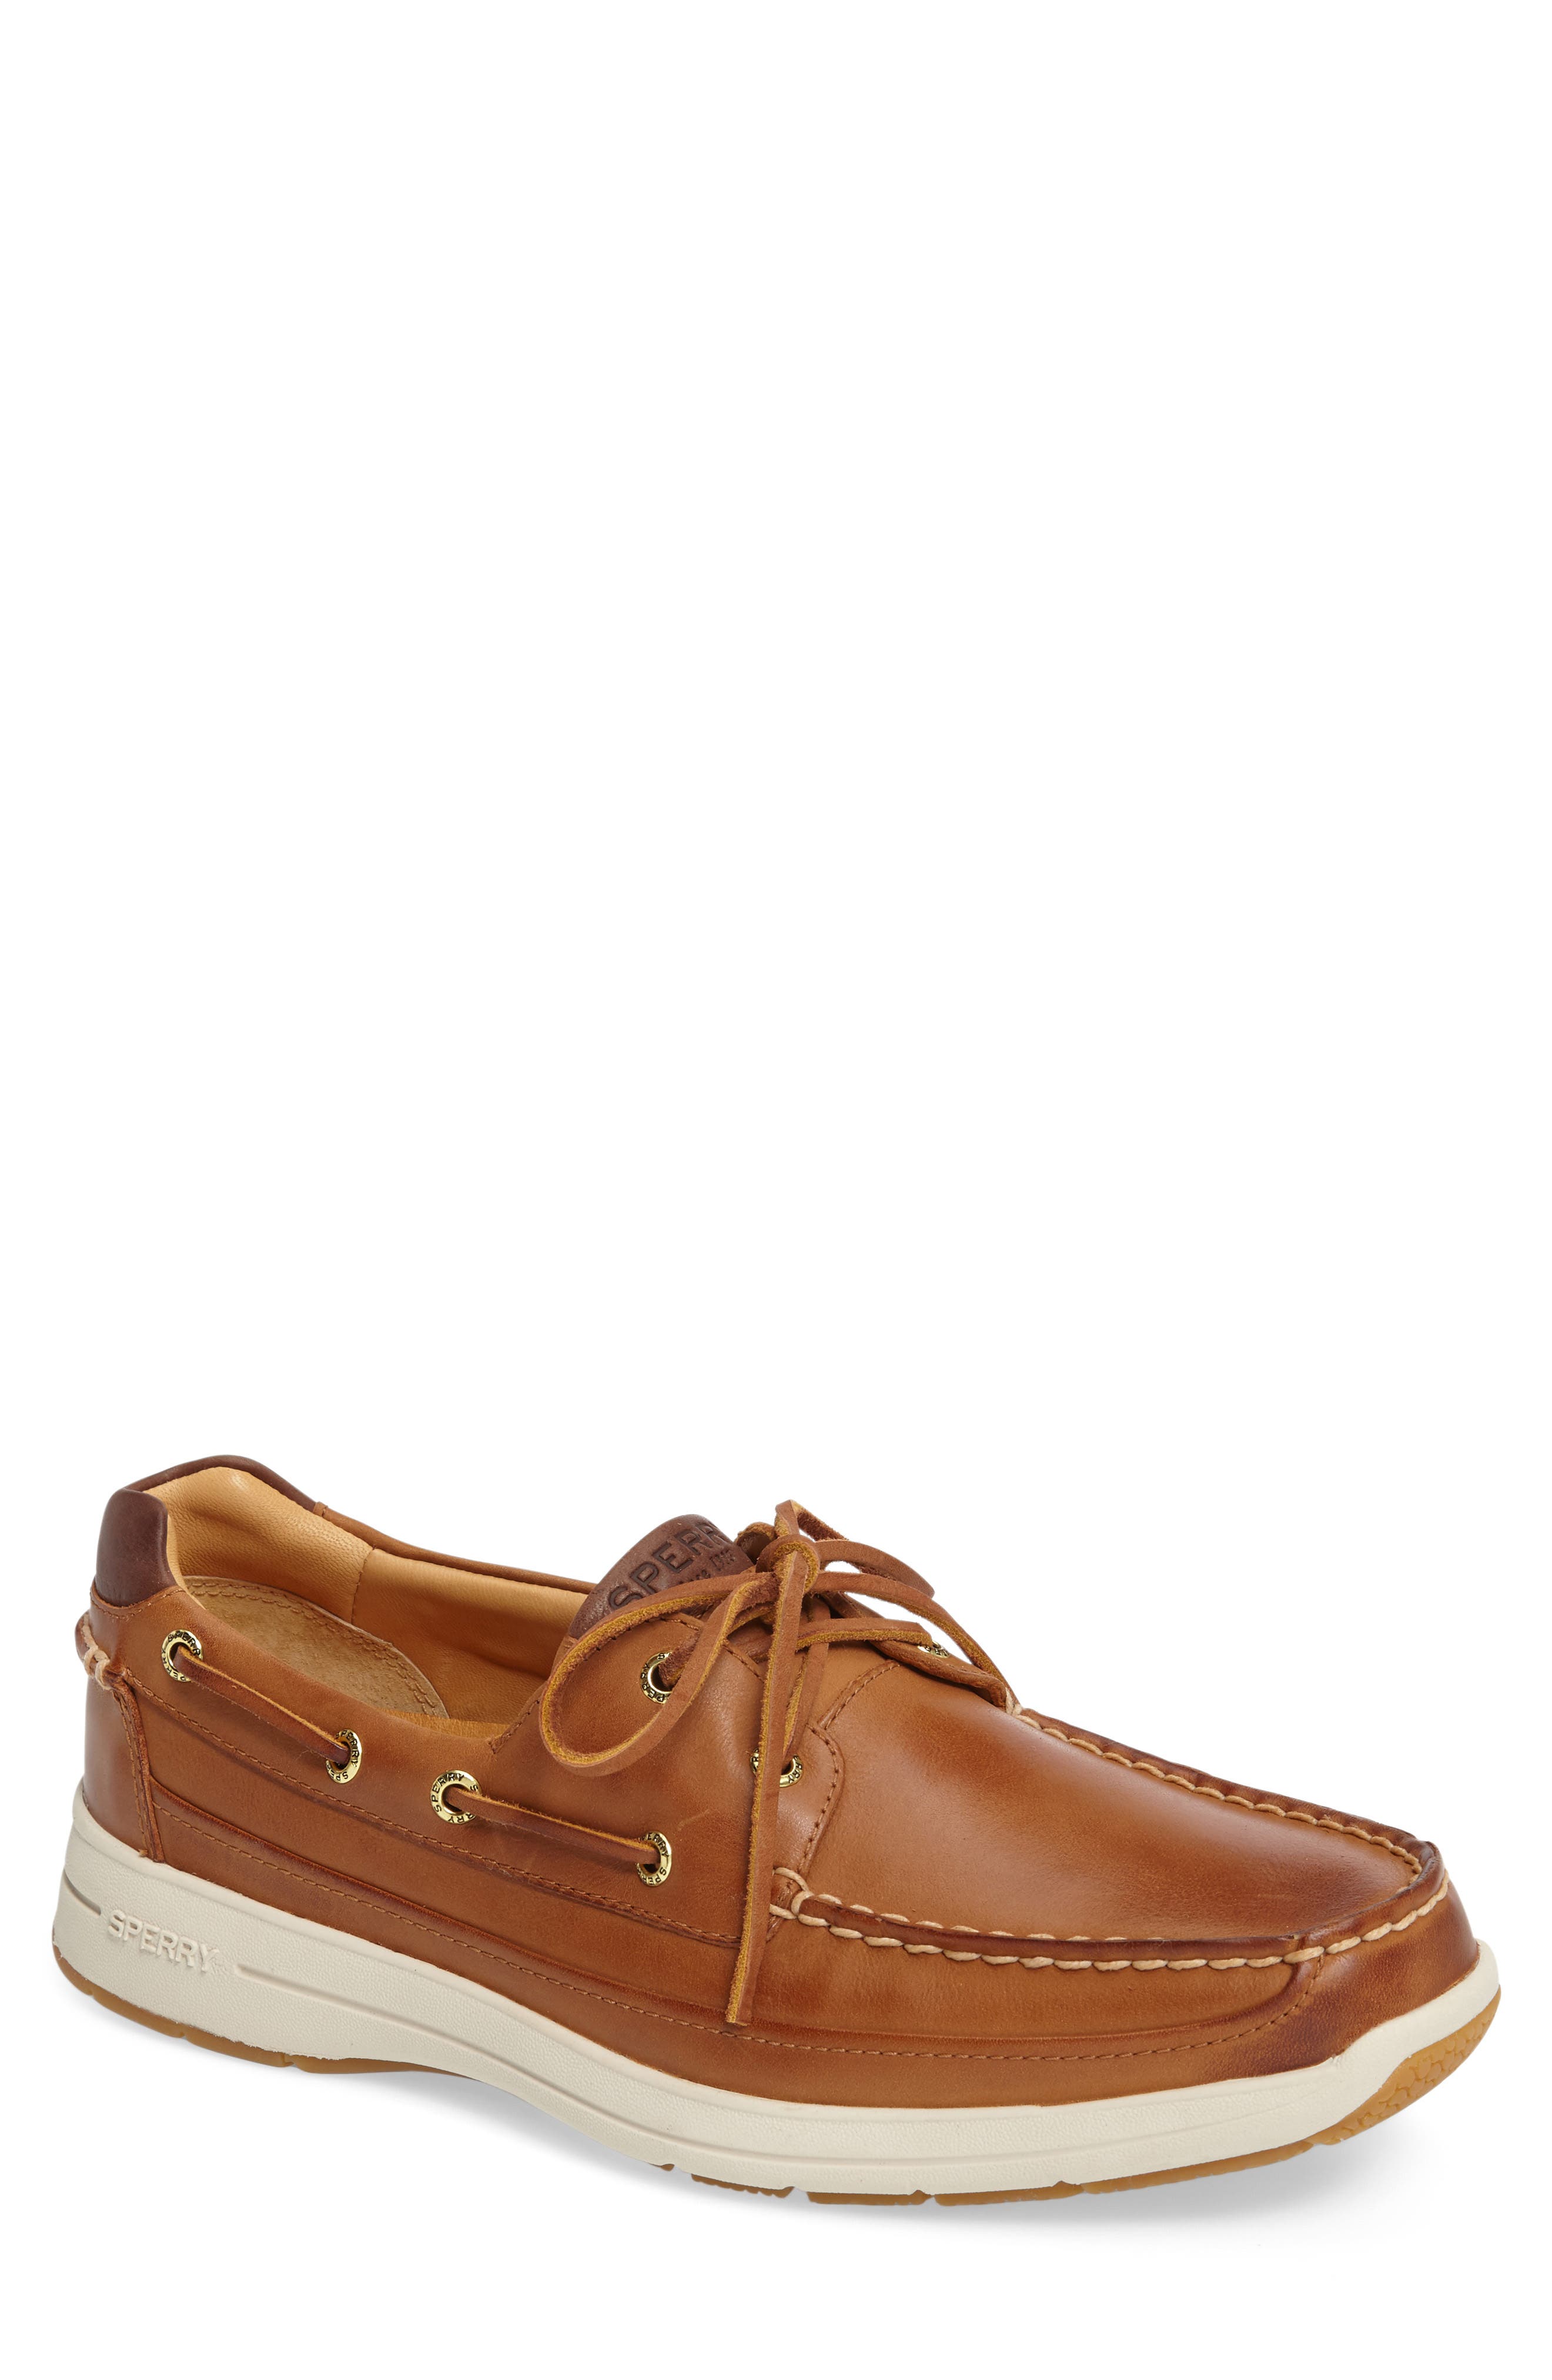 Sperry | Gold Cup Ultralite Boat Shoe 